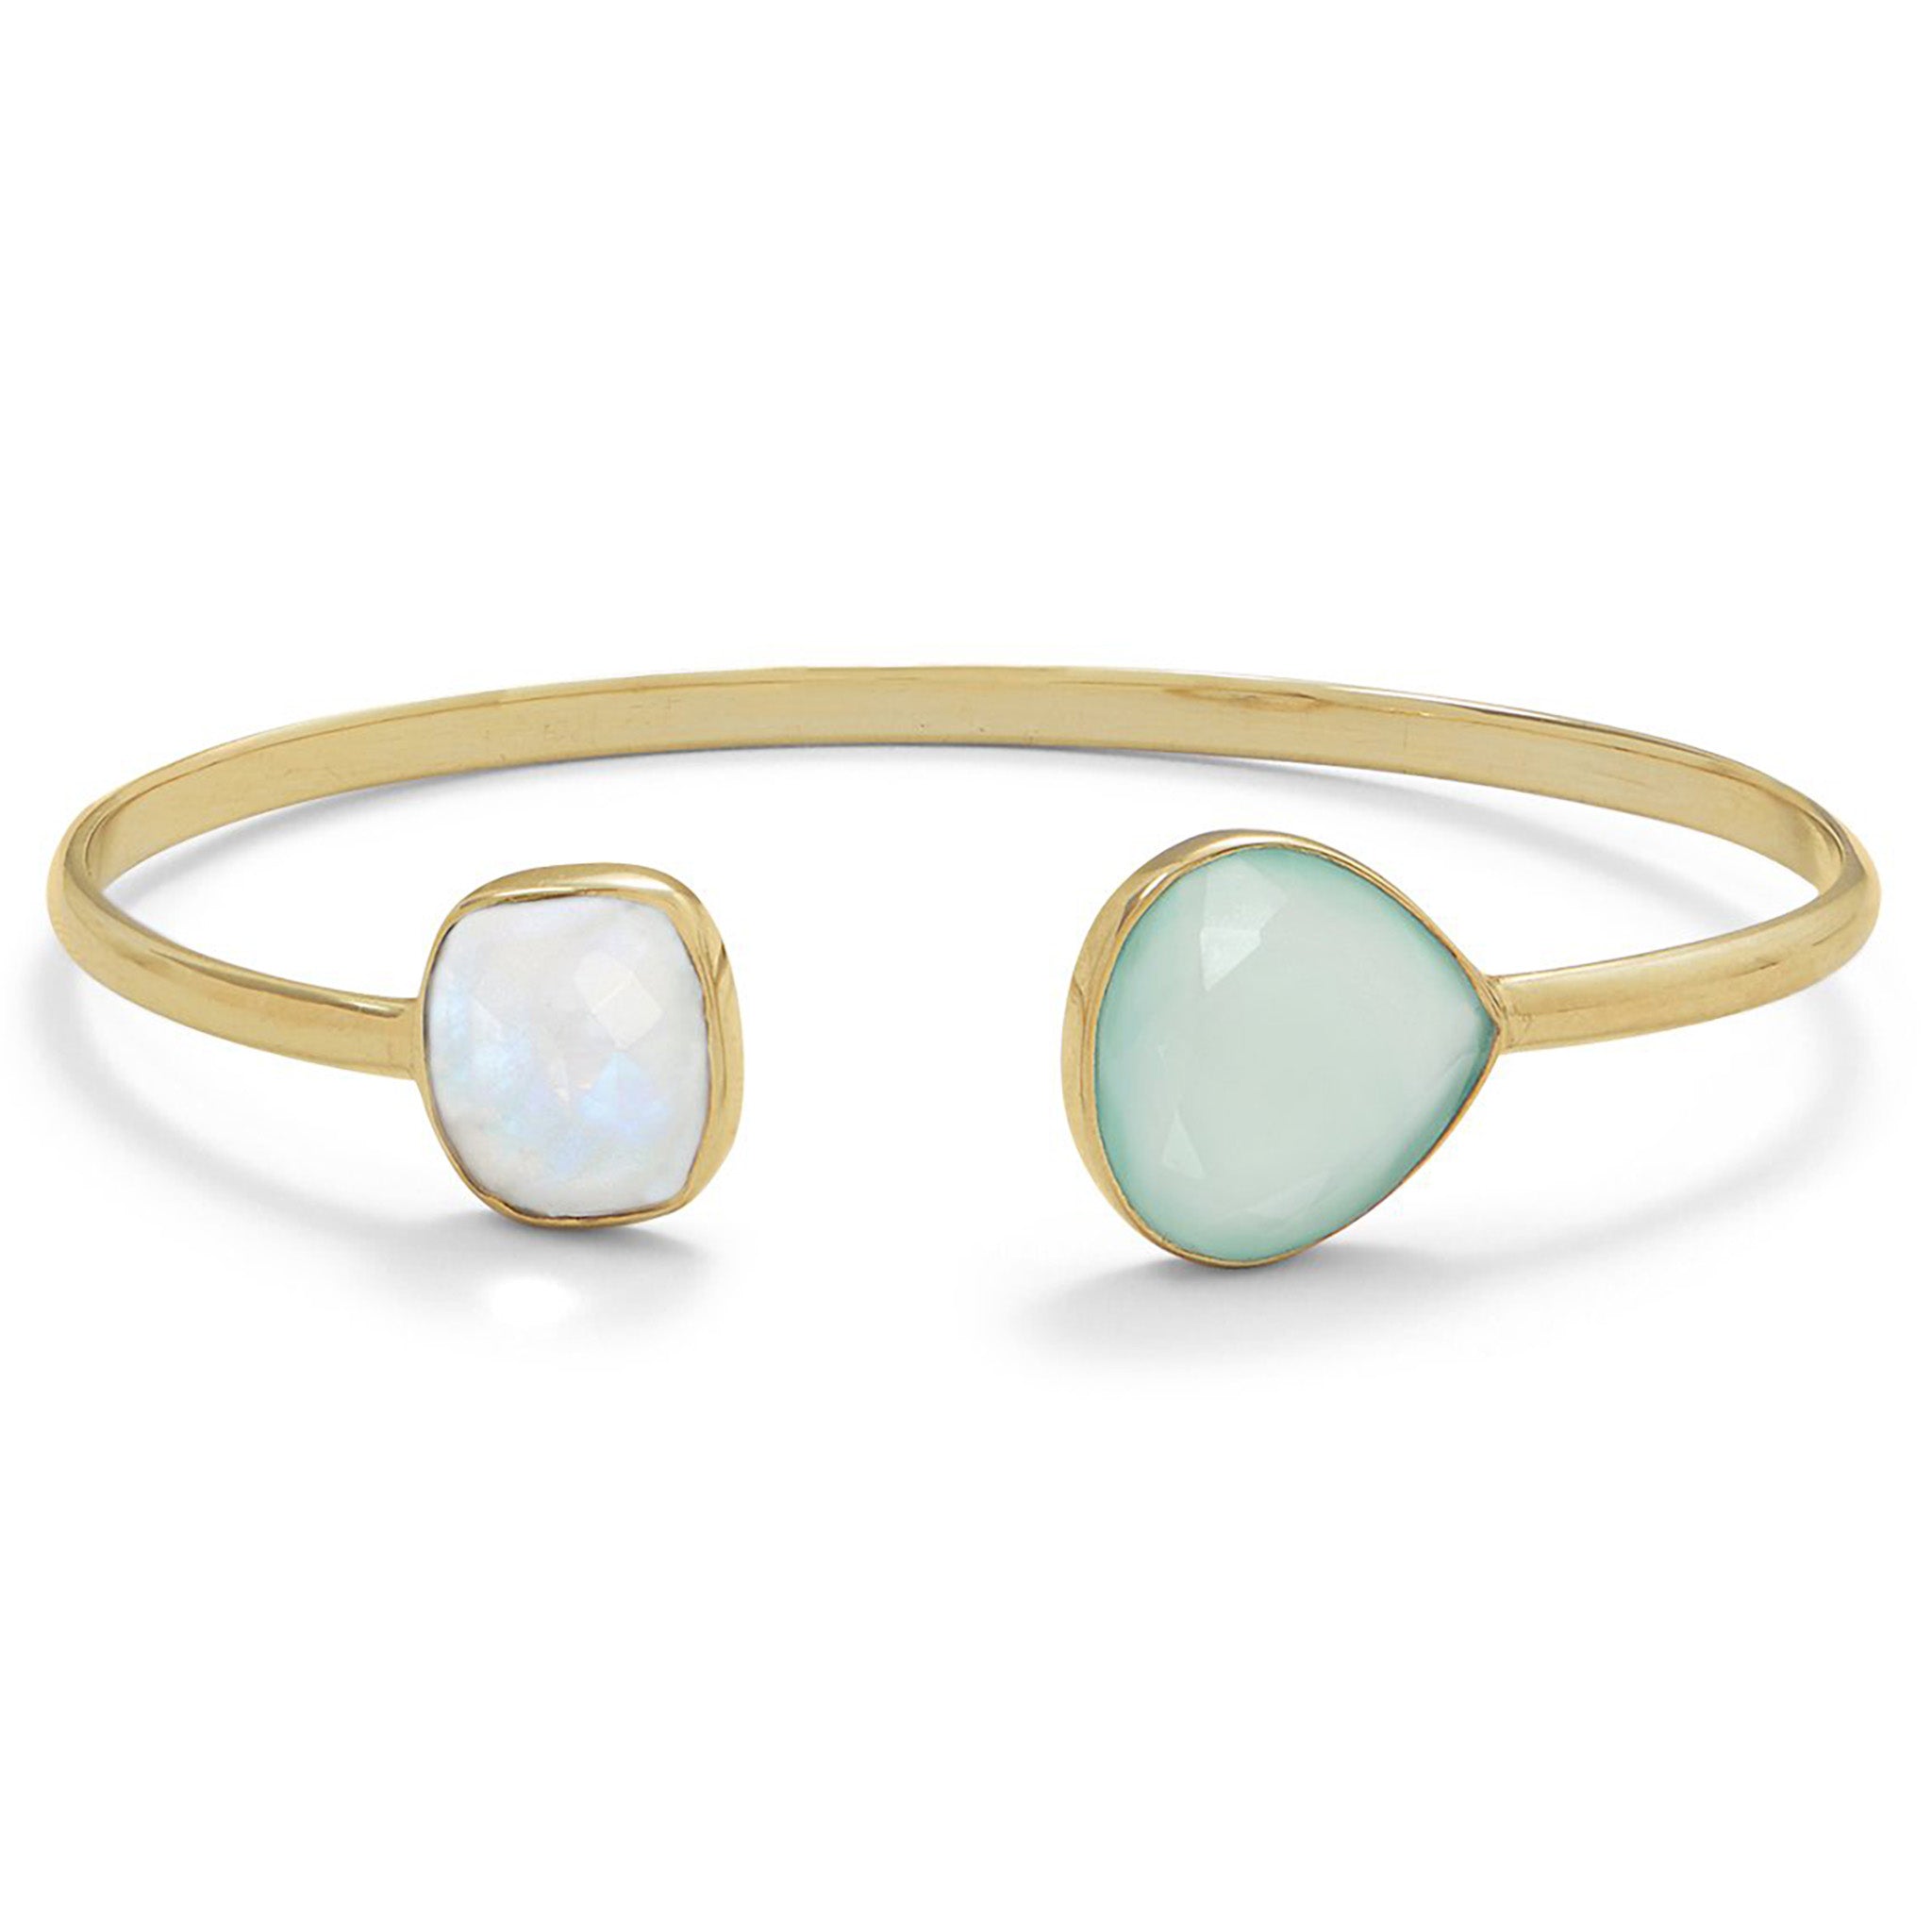 Moonstone and Chalcedony Gold Cuff Bracelet